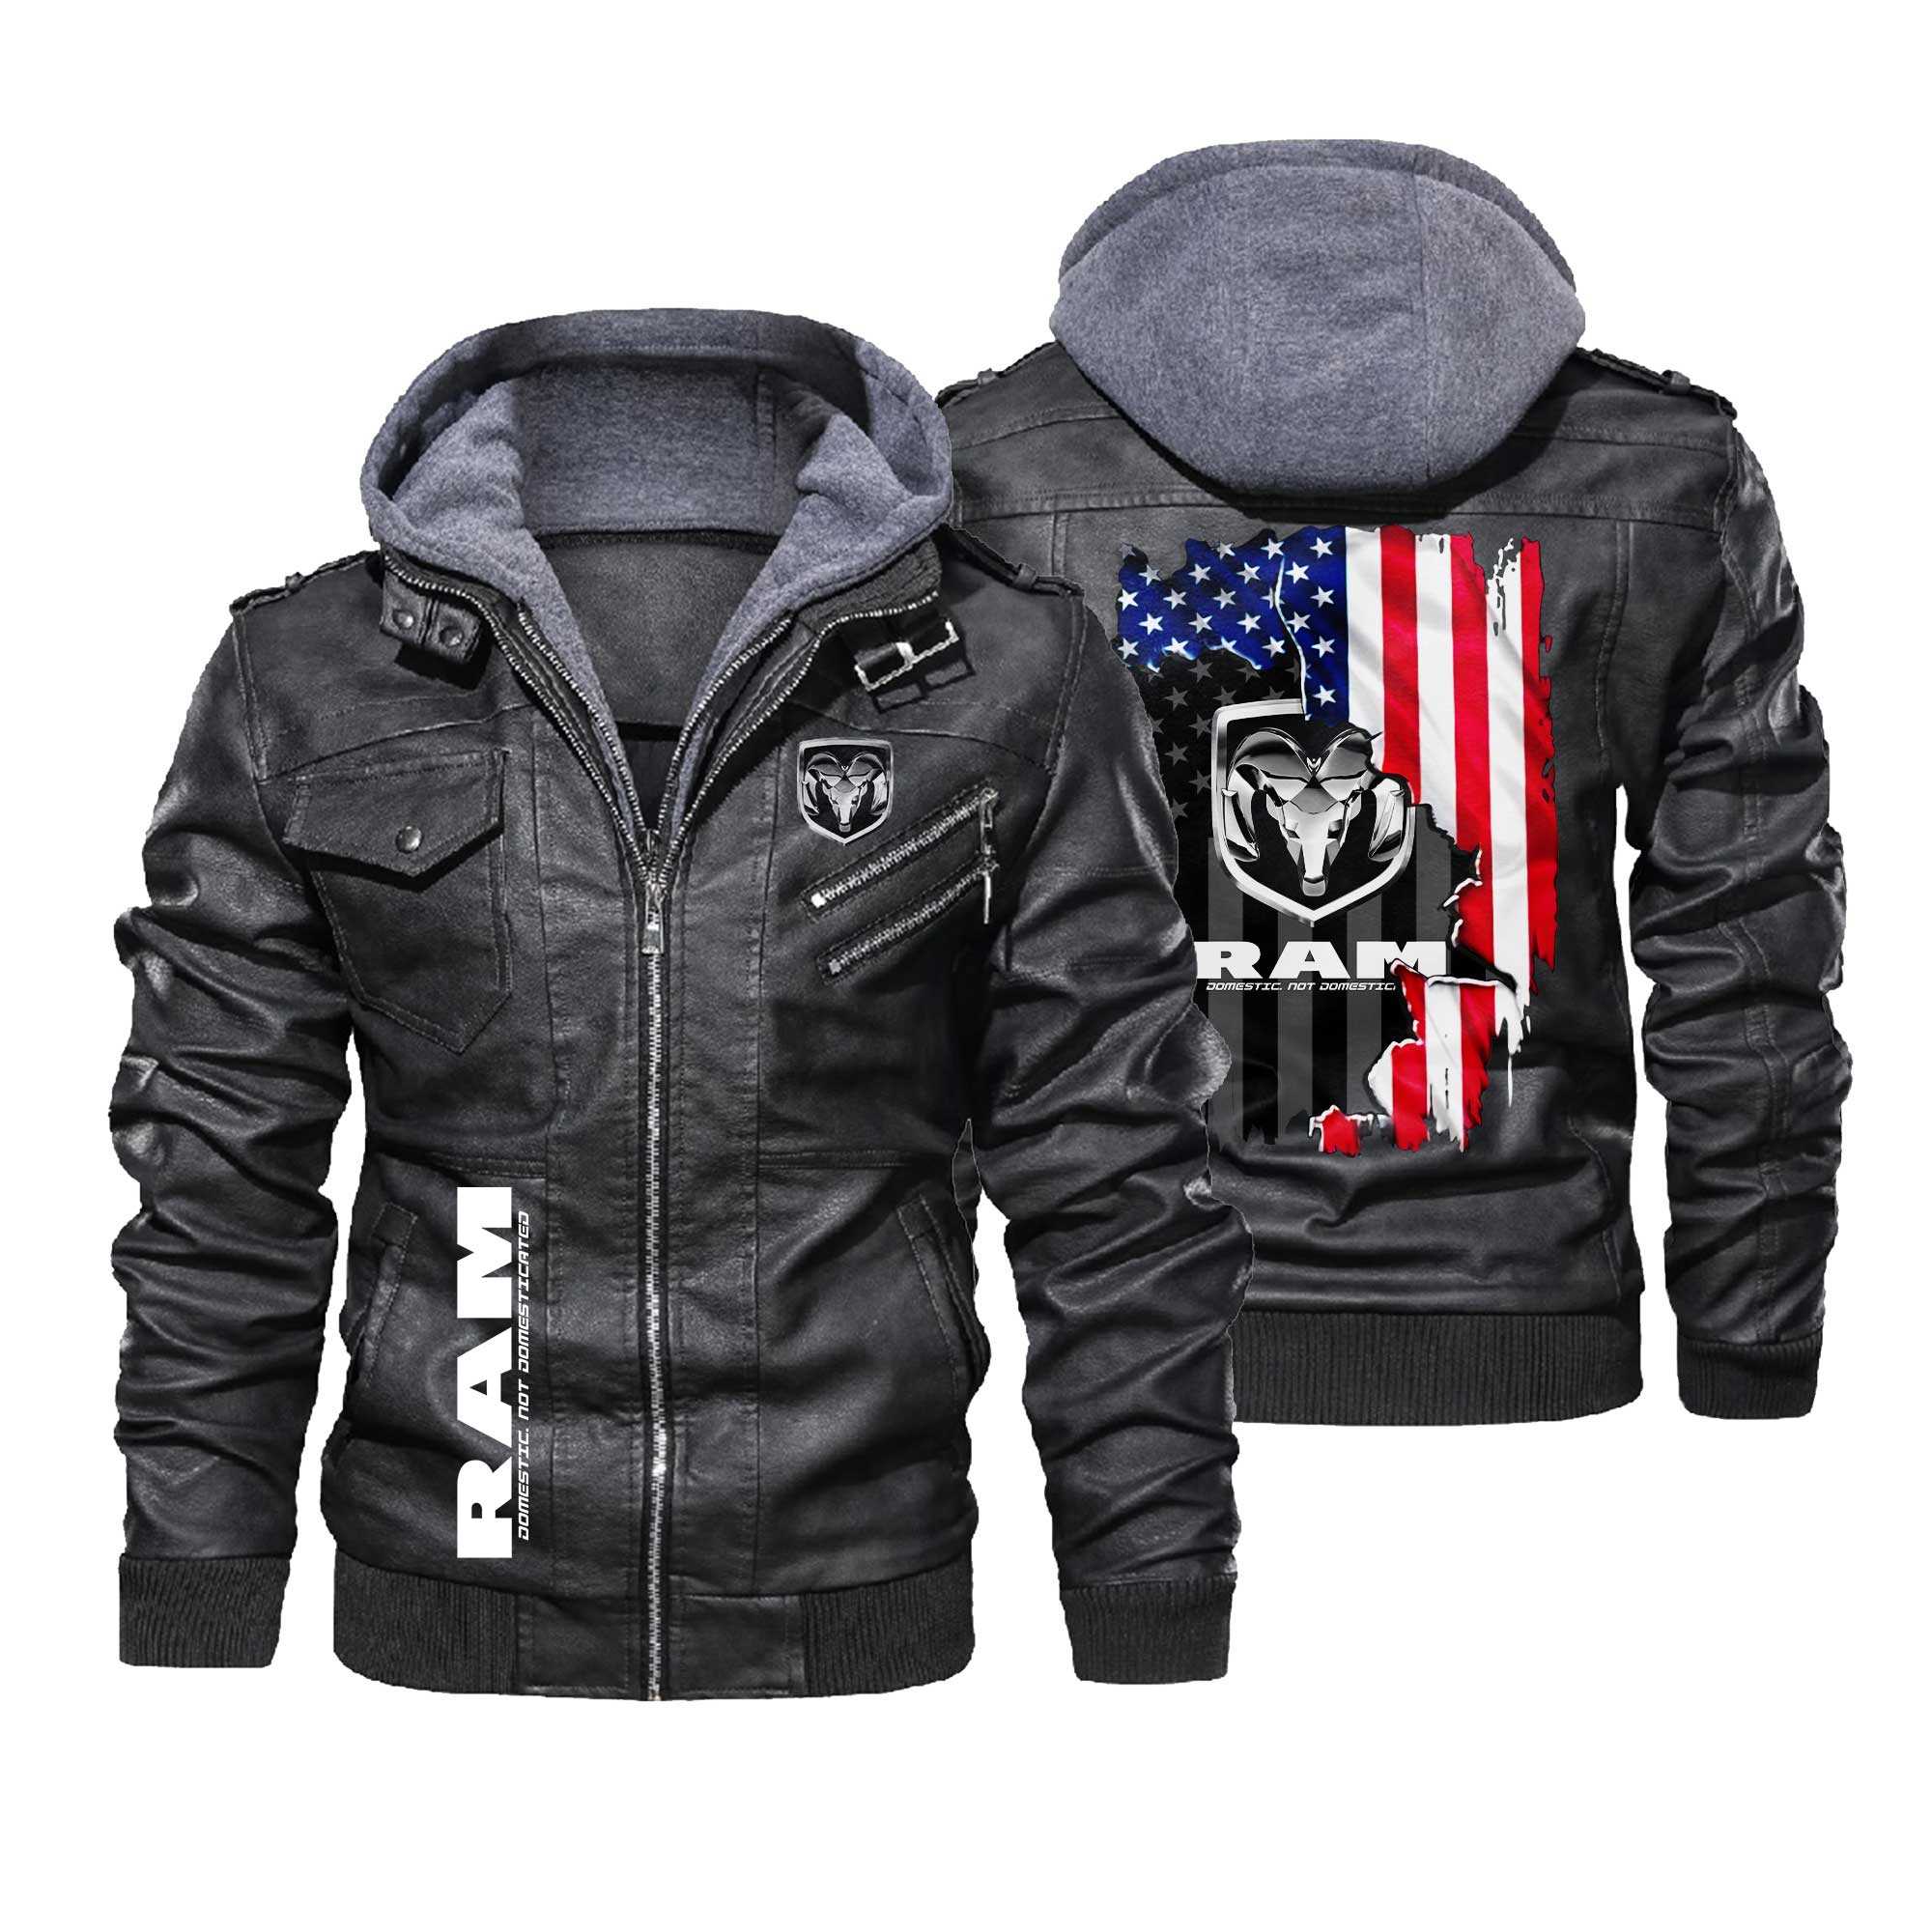 RAM US Flag Leather Jacket LJ2277 – Let the colors inspire you!